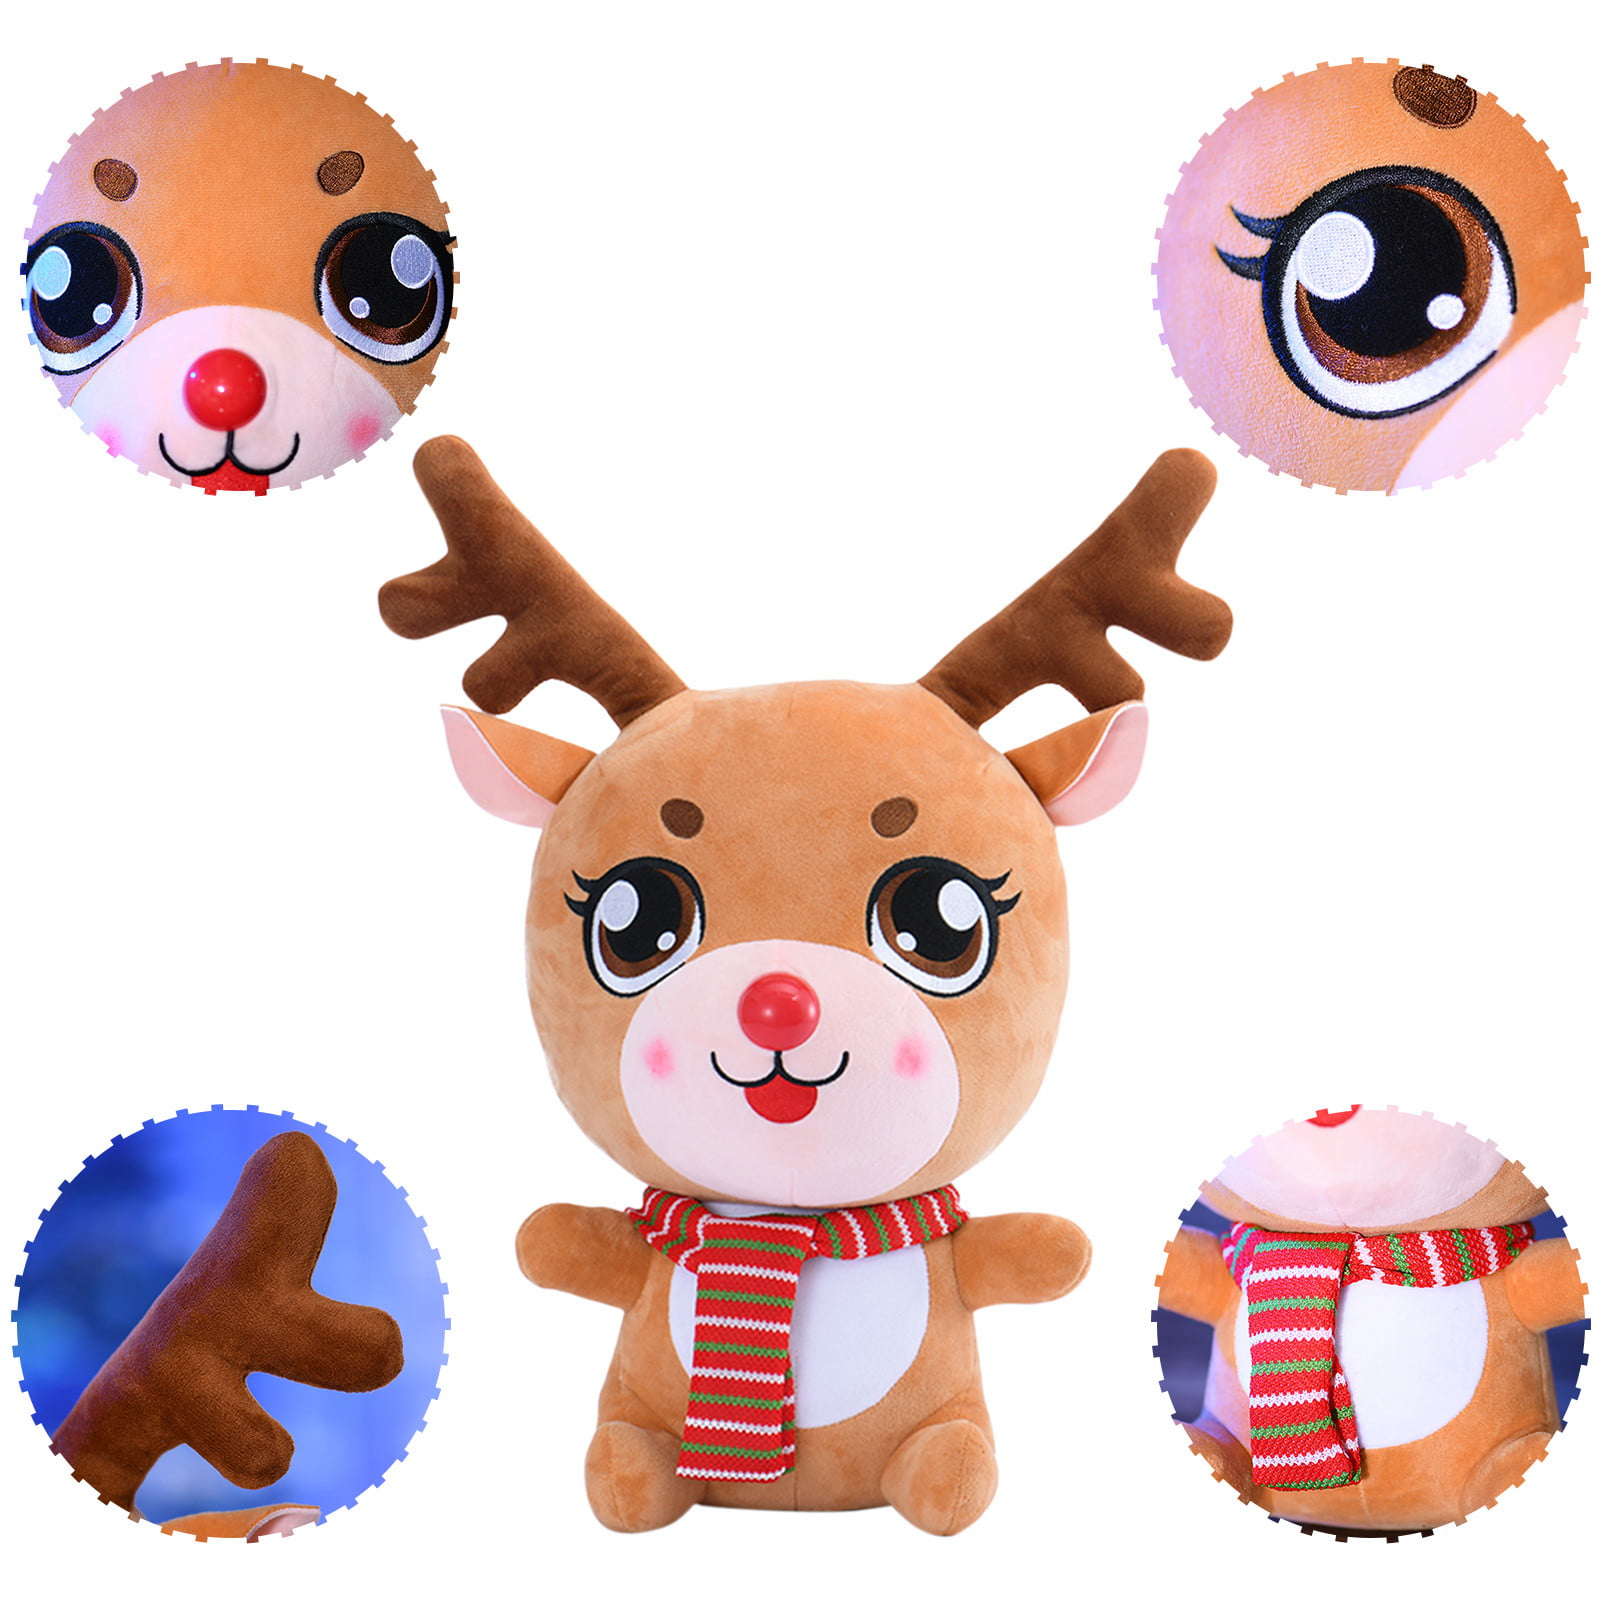 Keel Cute Soft Present Gift NEW Confetti Christmas Reindeer Soft Toy 